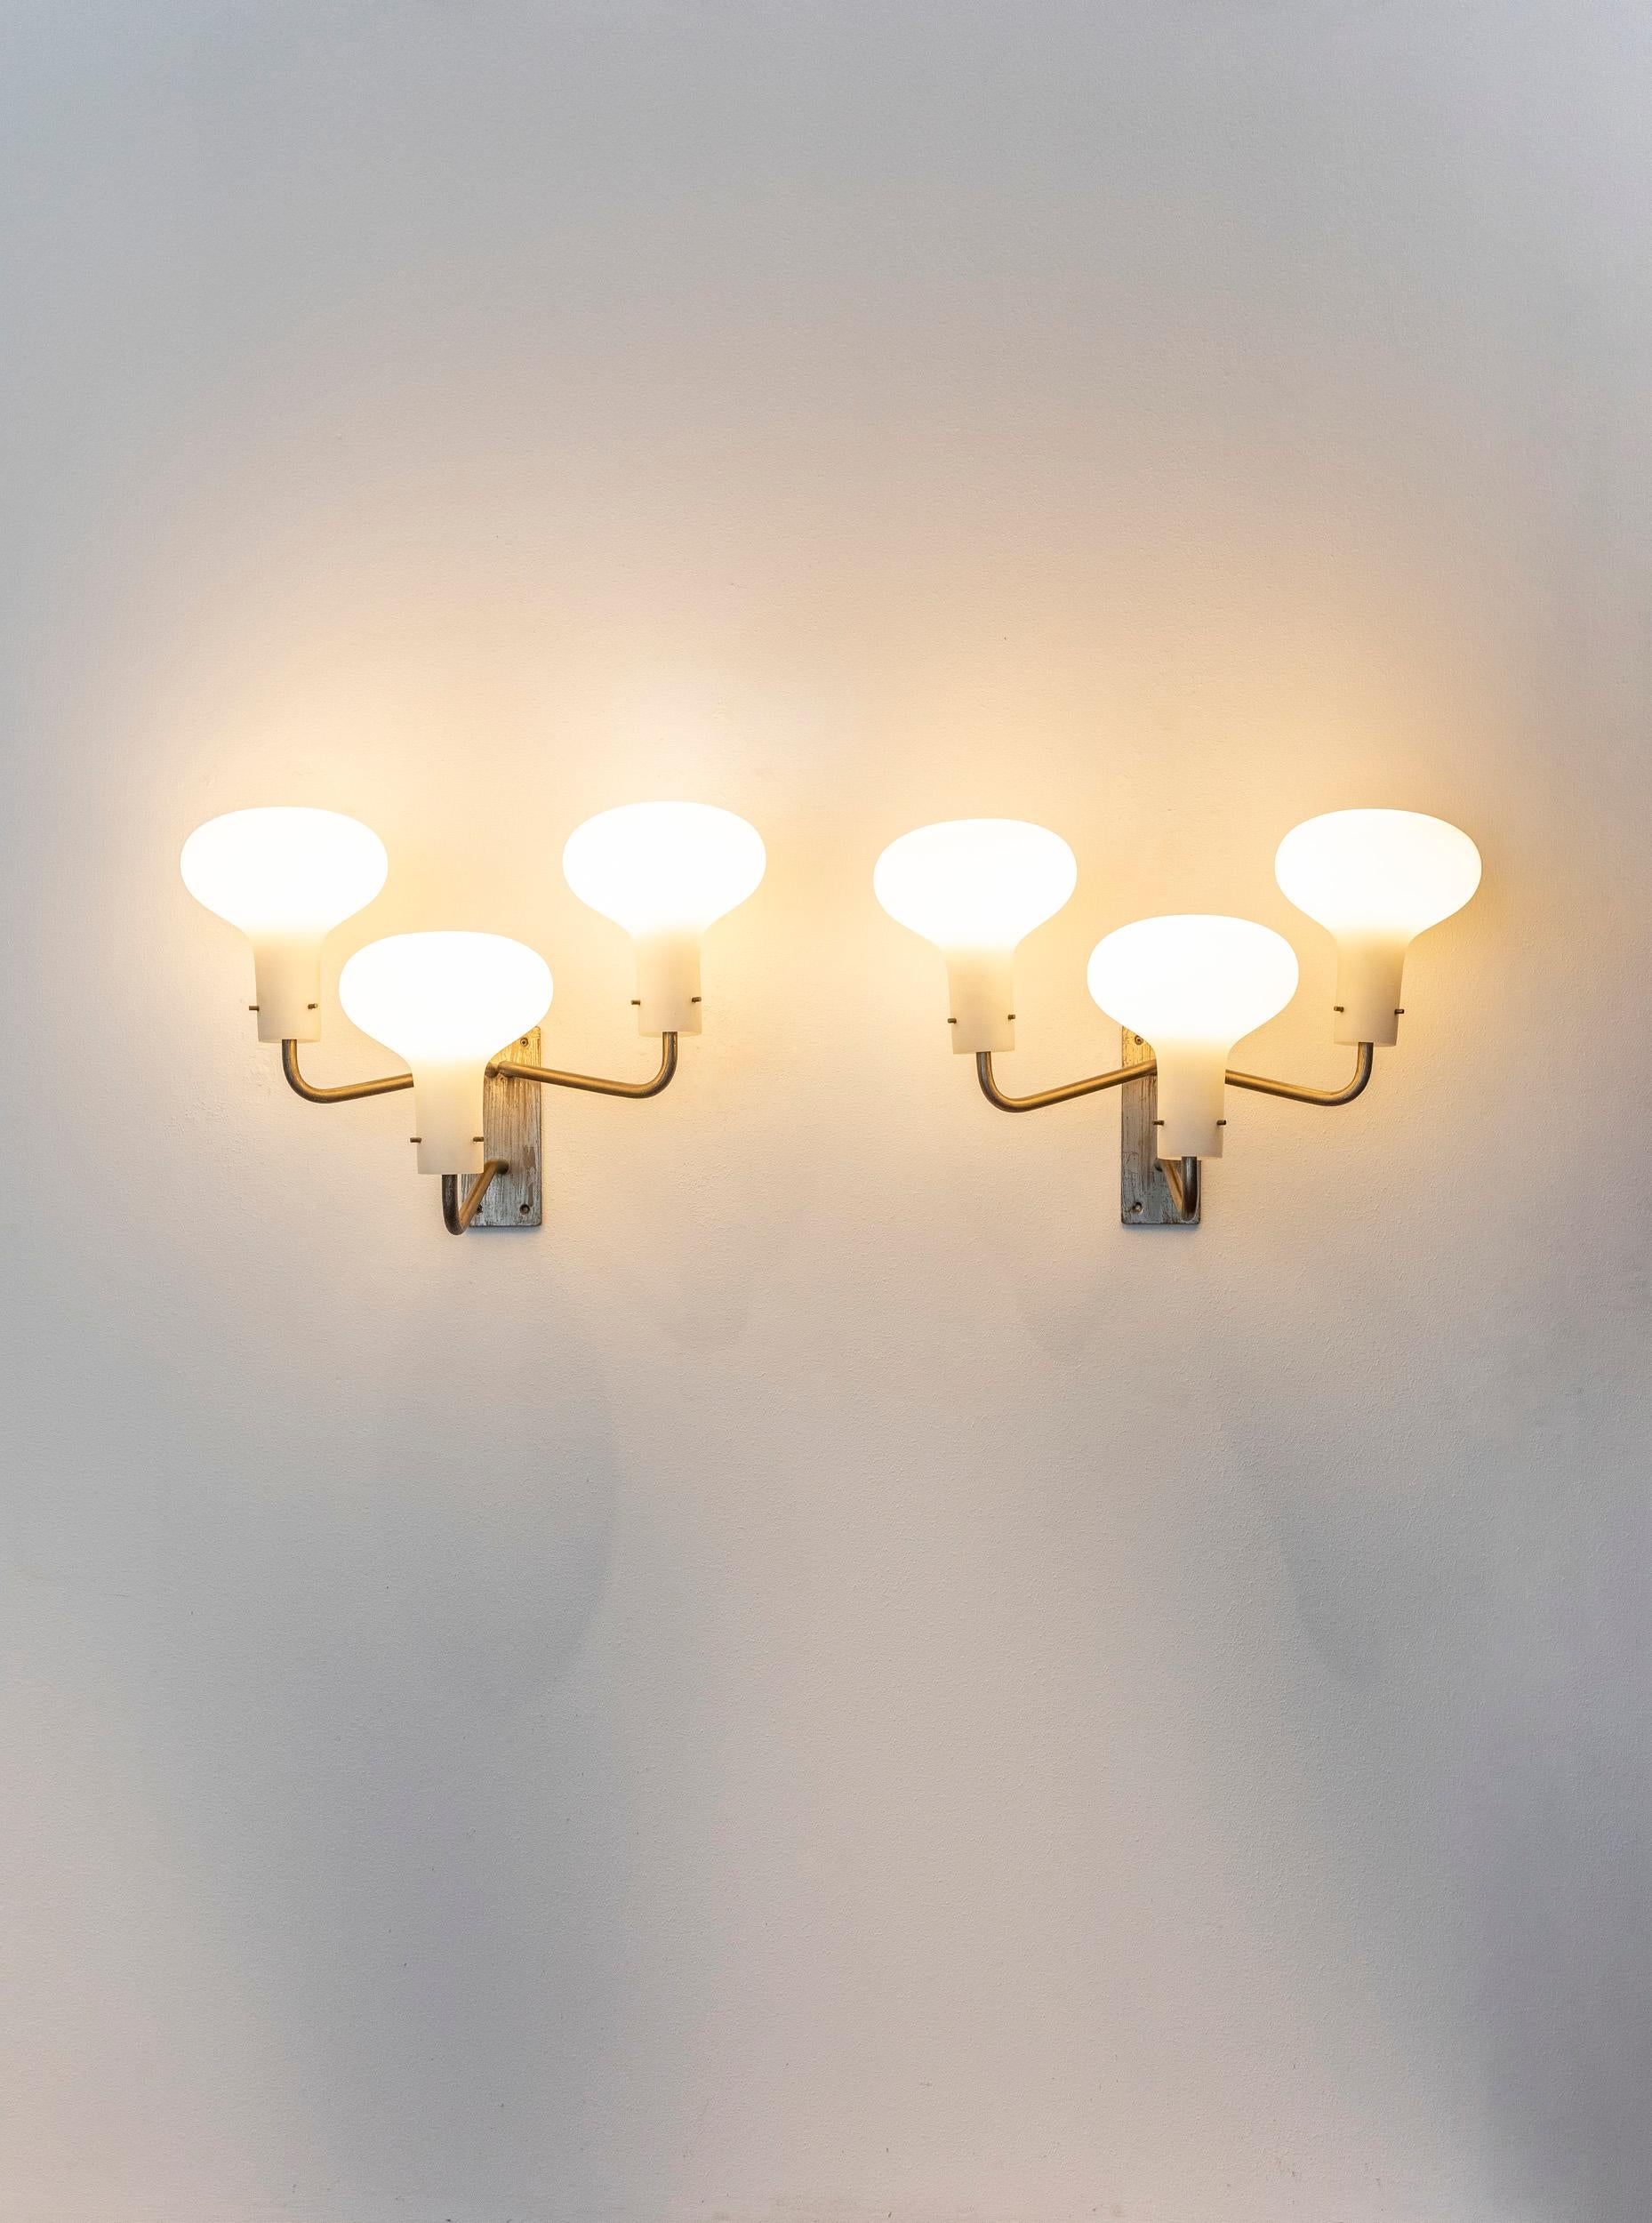 Mid-Century Modern Midcentury wall lights model LP 12 by Ignazio Gardella for Azucena, signed